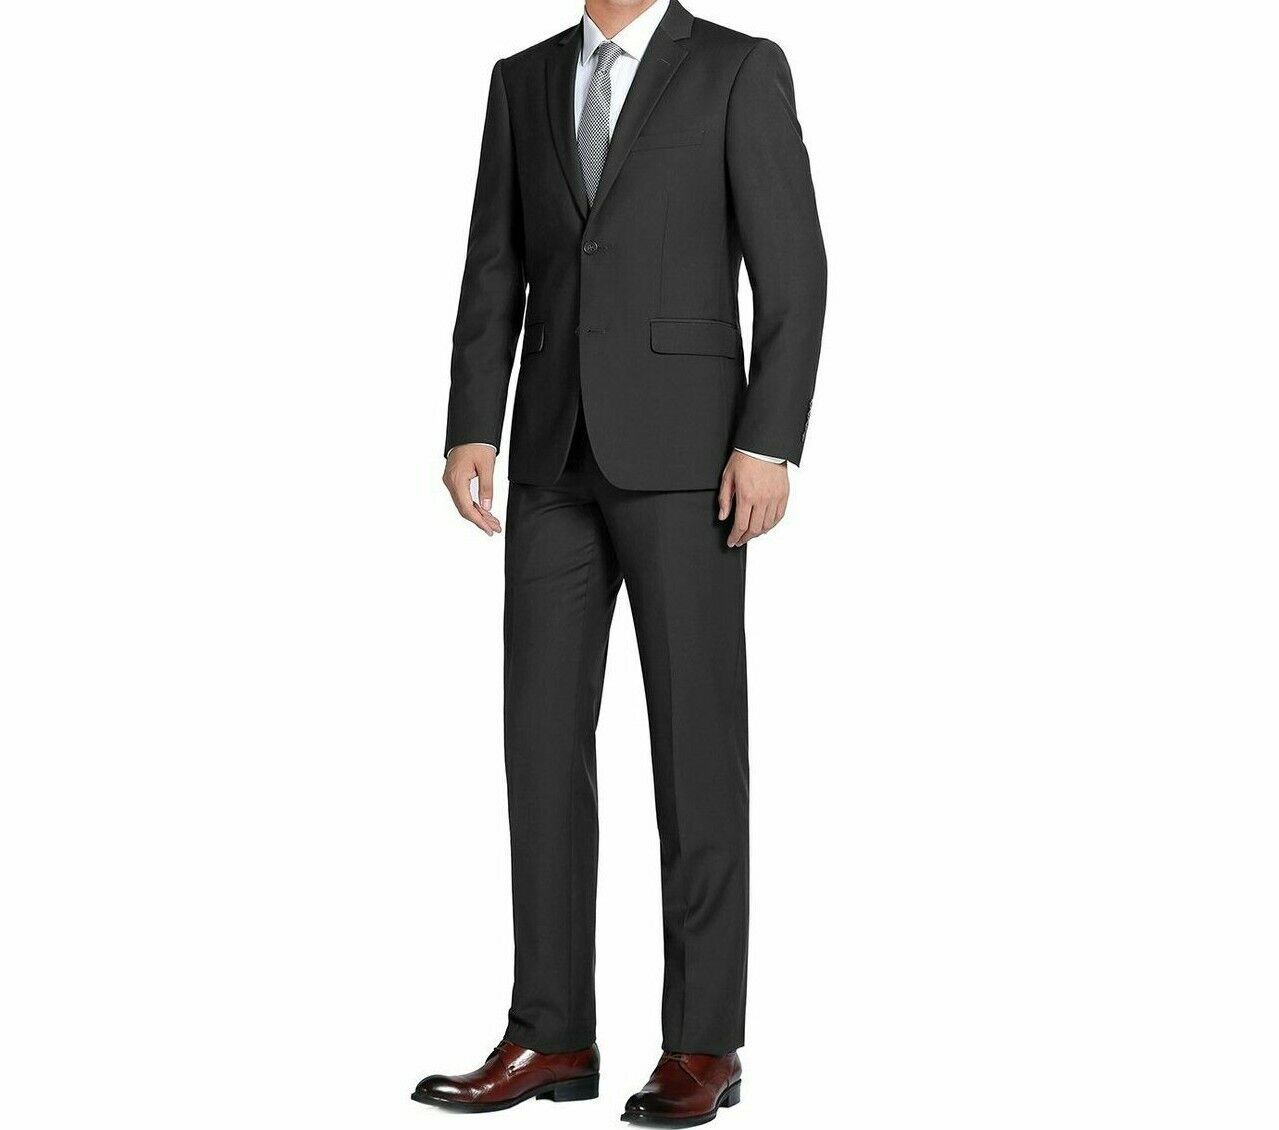 Primary image for Men RENOIR Suit Solid Two Button Business Formal Classic Regular Fit 201-1 Black